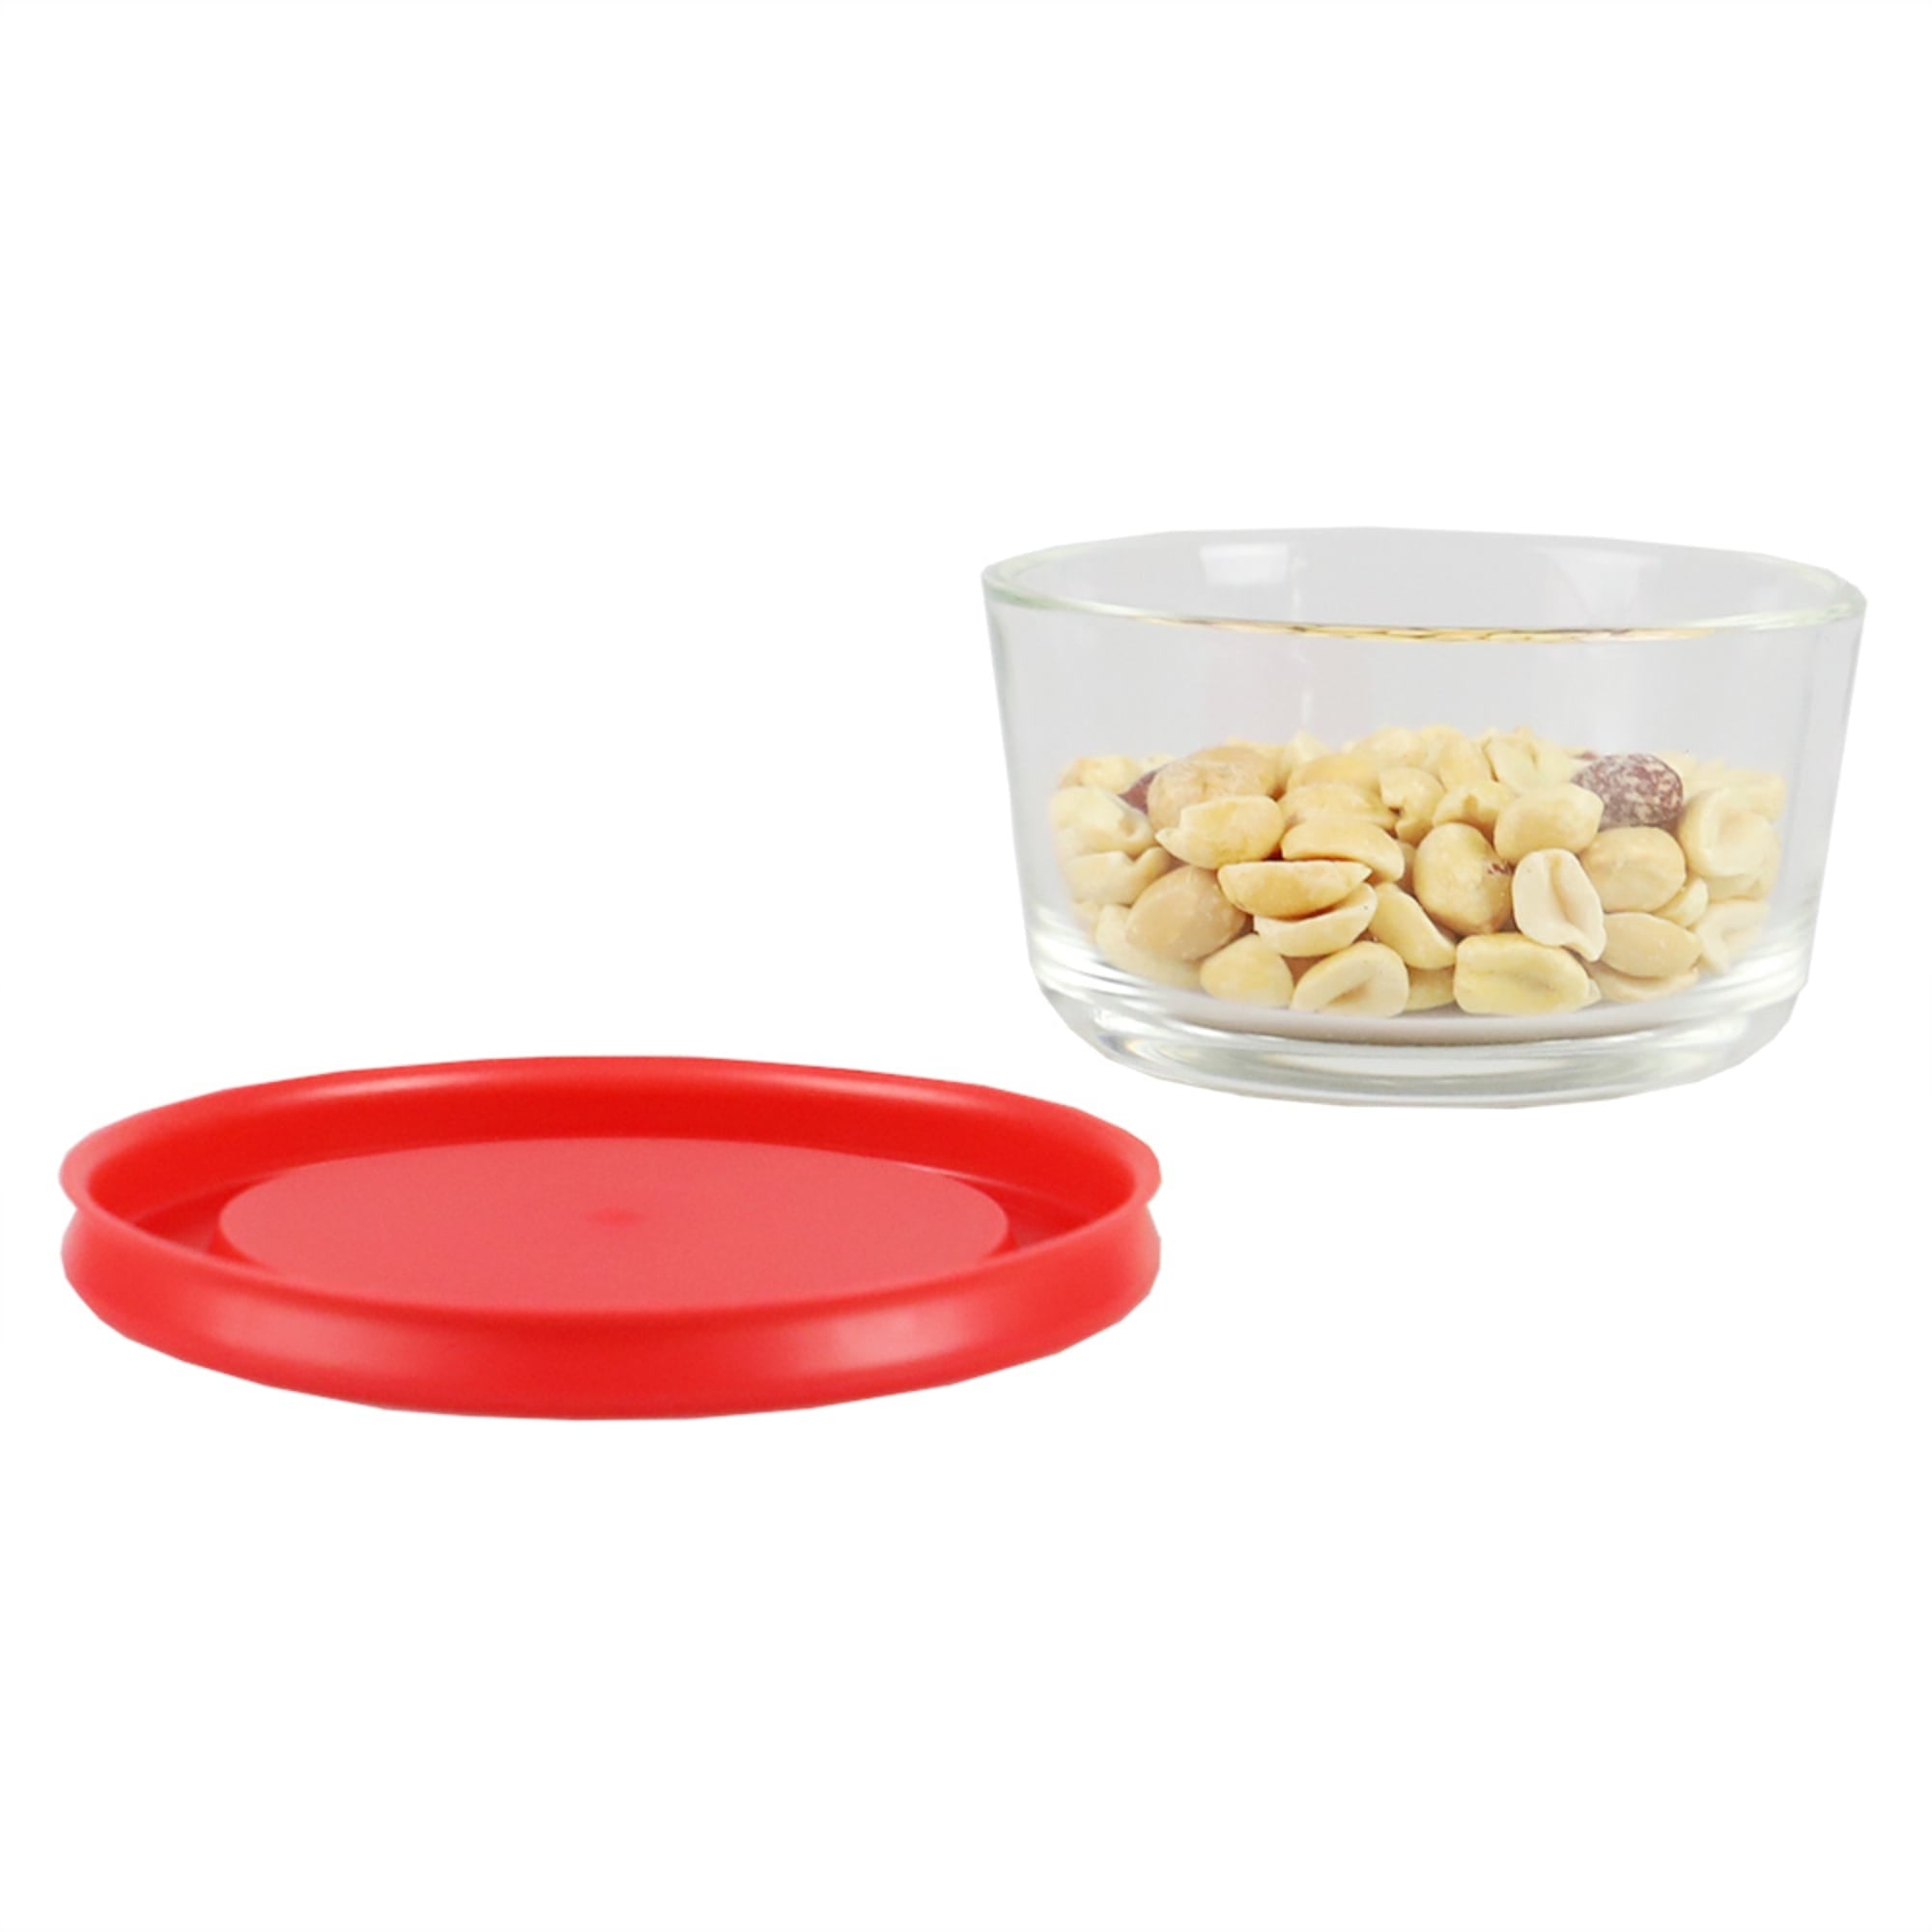 Home Basics Round 8 oz. Borosilicate Glass Food Storage Container with Red Lid $2.00 EACH, CASE PACK OF 12